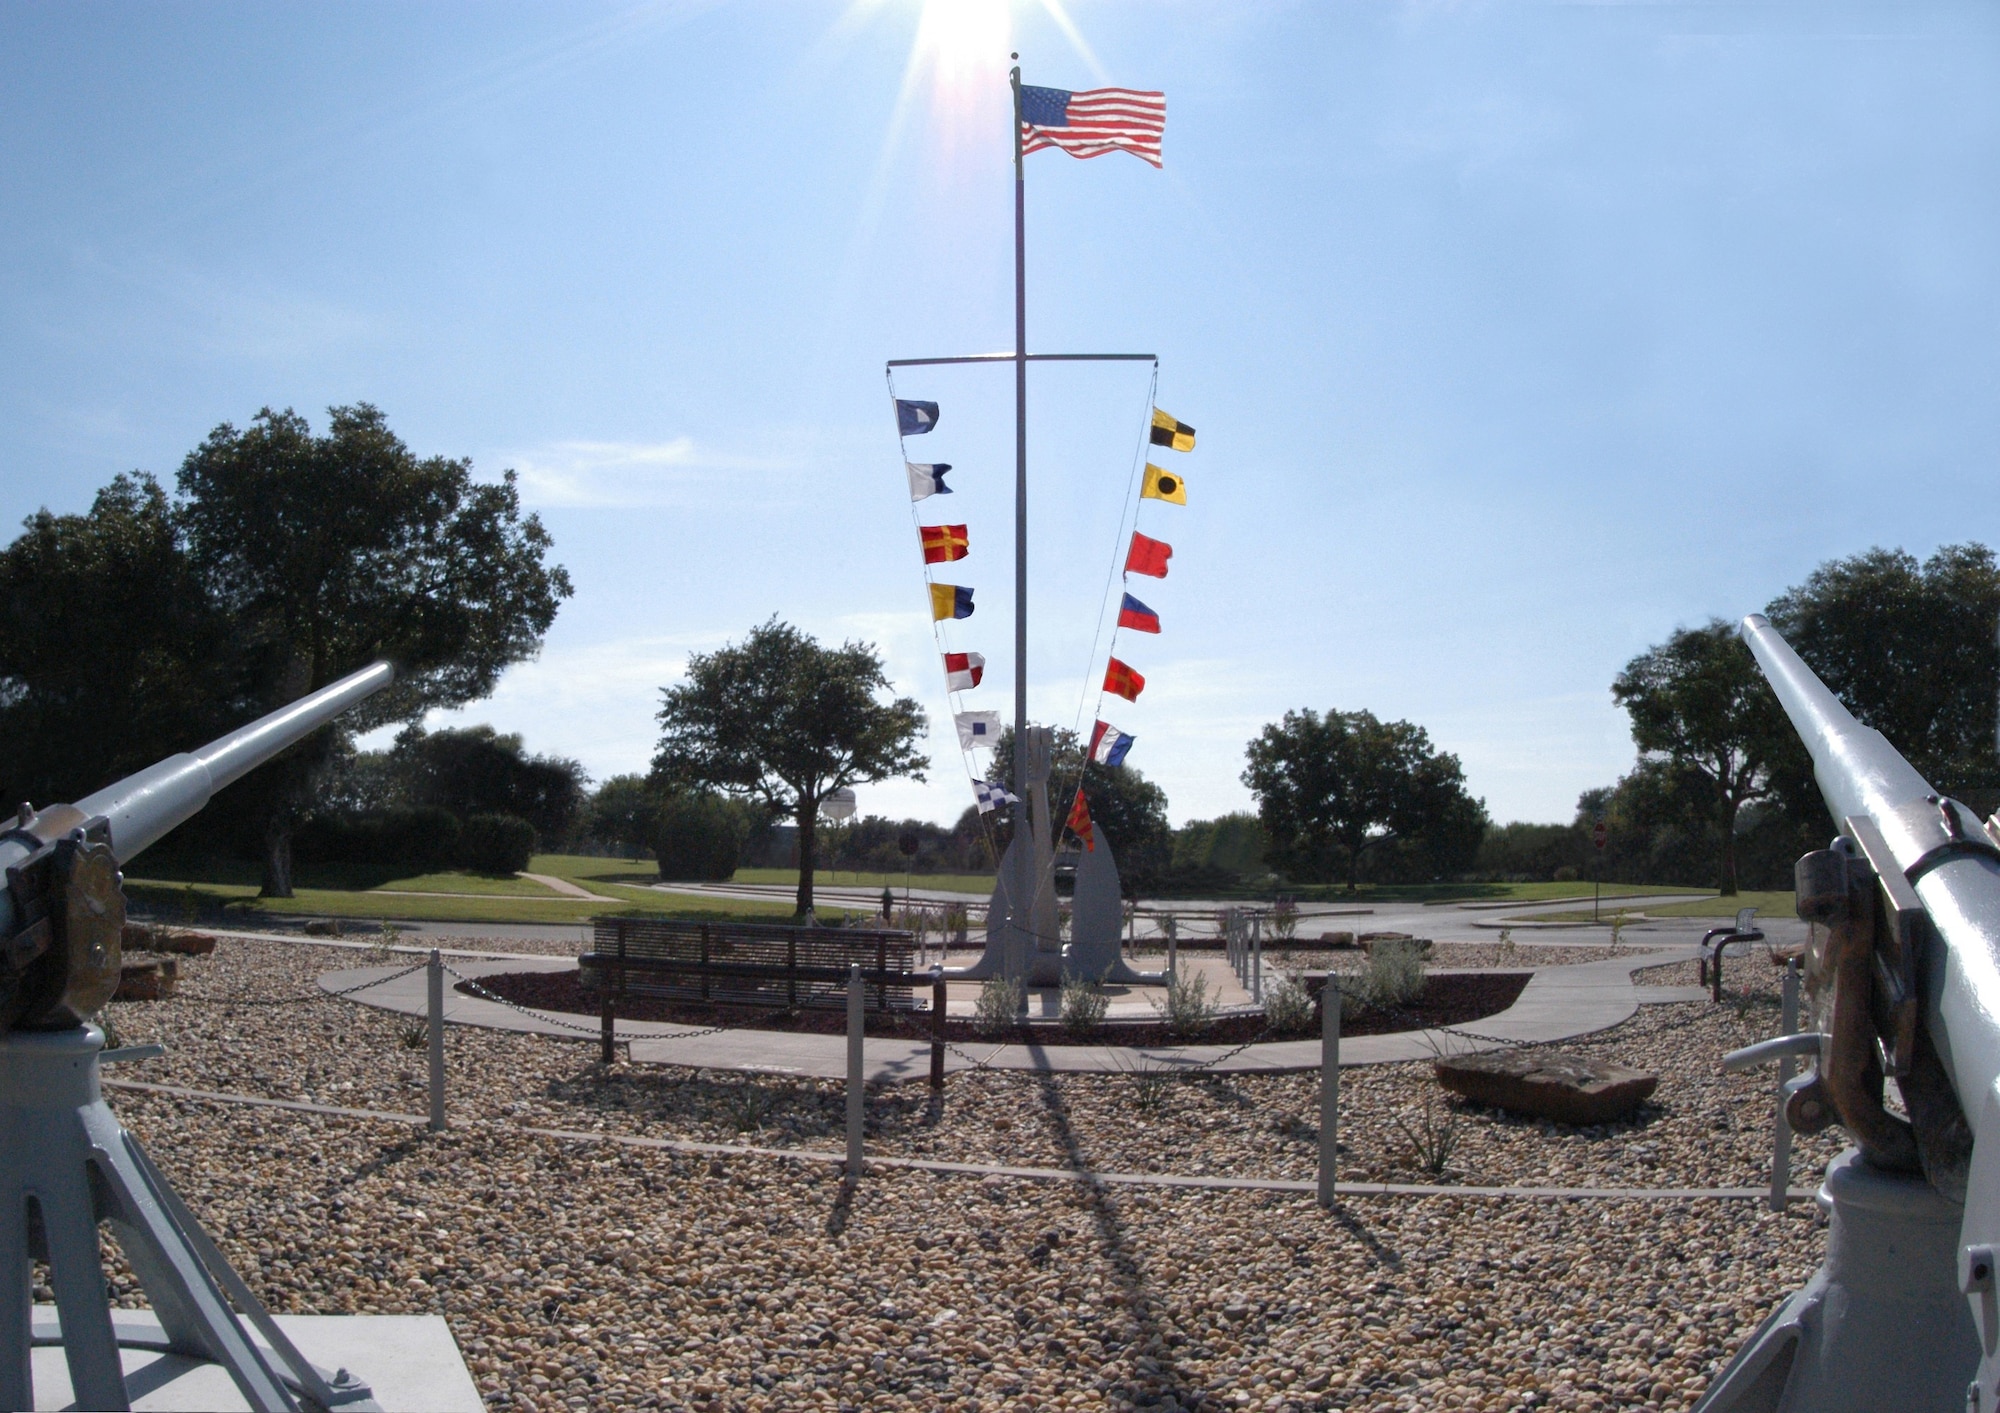 Liberty Park, Goodfellow Air Force Base, Texas, is dedicated to the honor and memory of the 34 brave American Sailors who gave their lives in June 1967 defending the American Intelligence vessel, USS Liberty. (Courtesy photo)